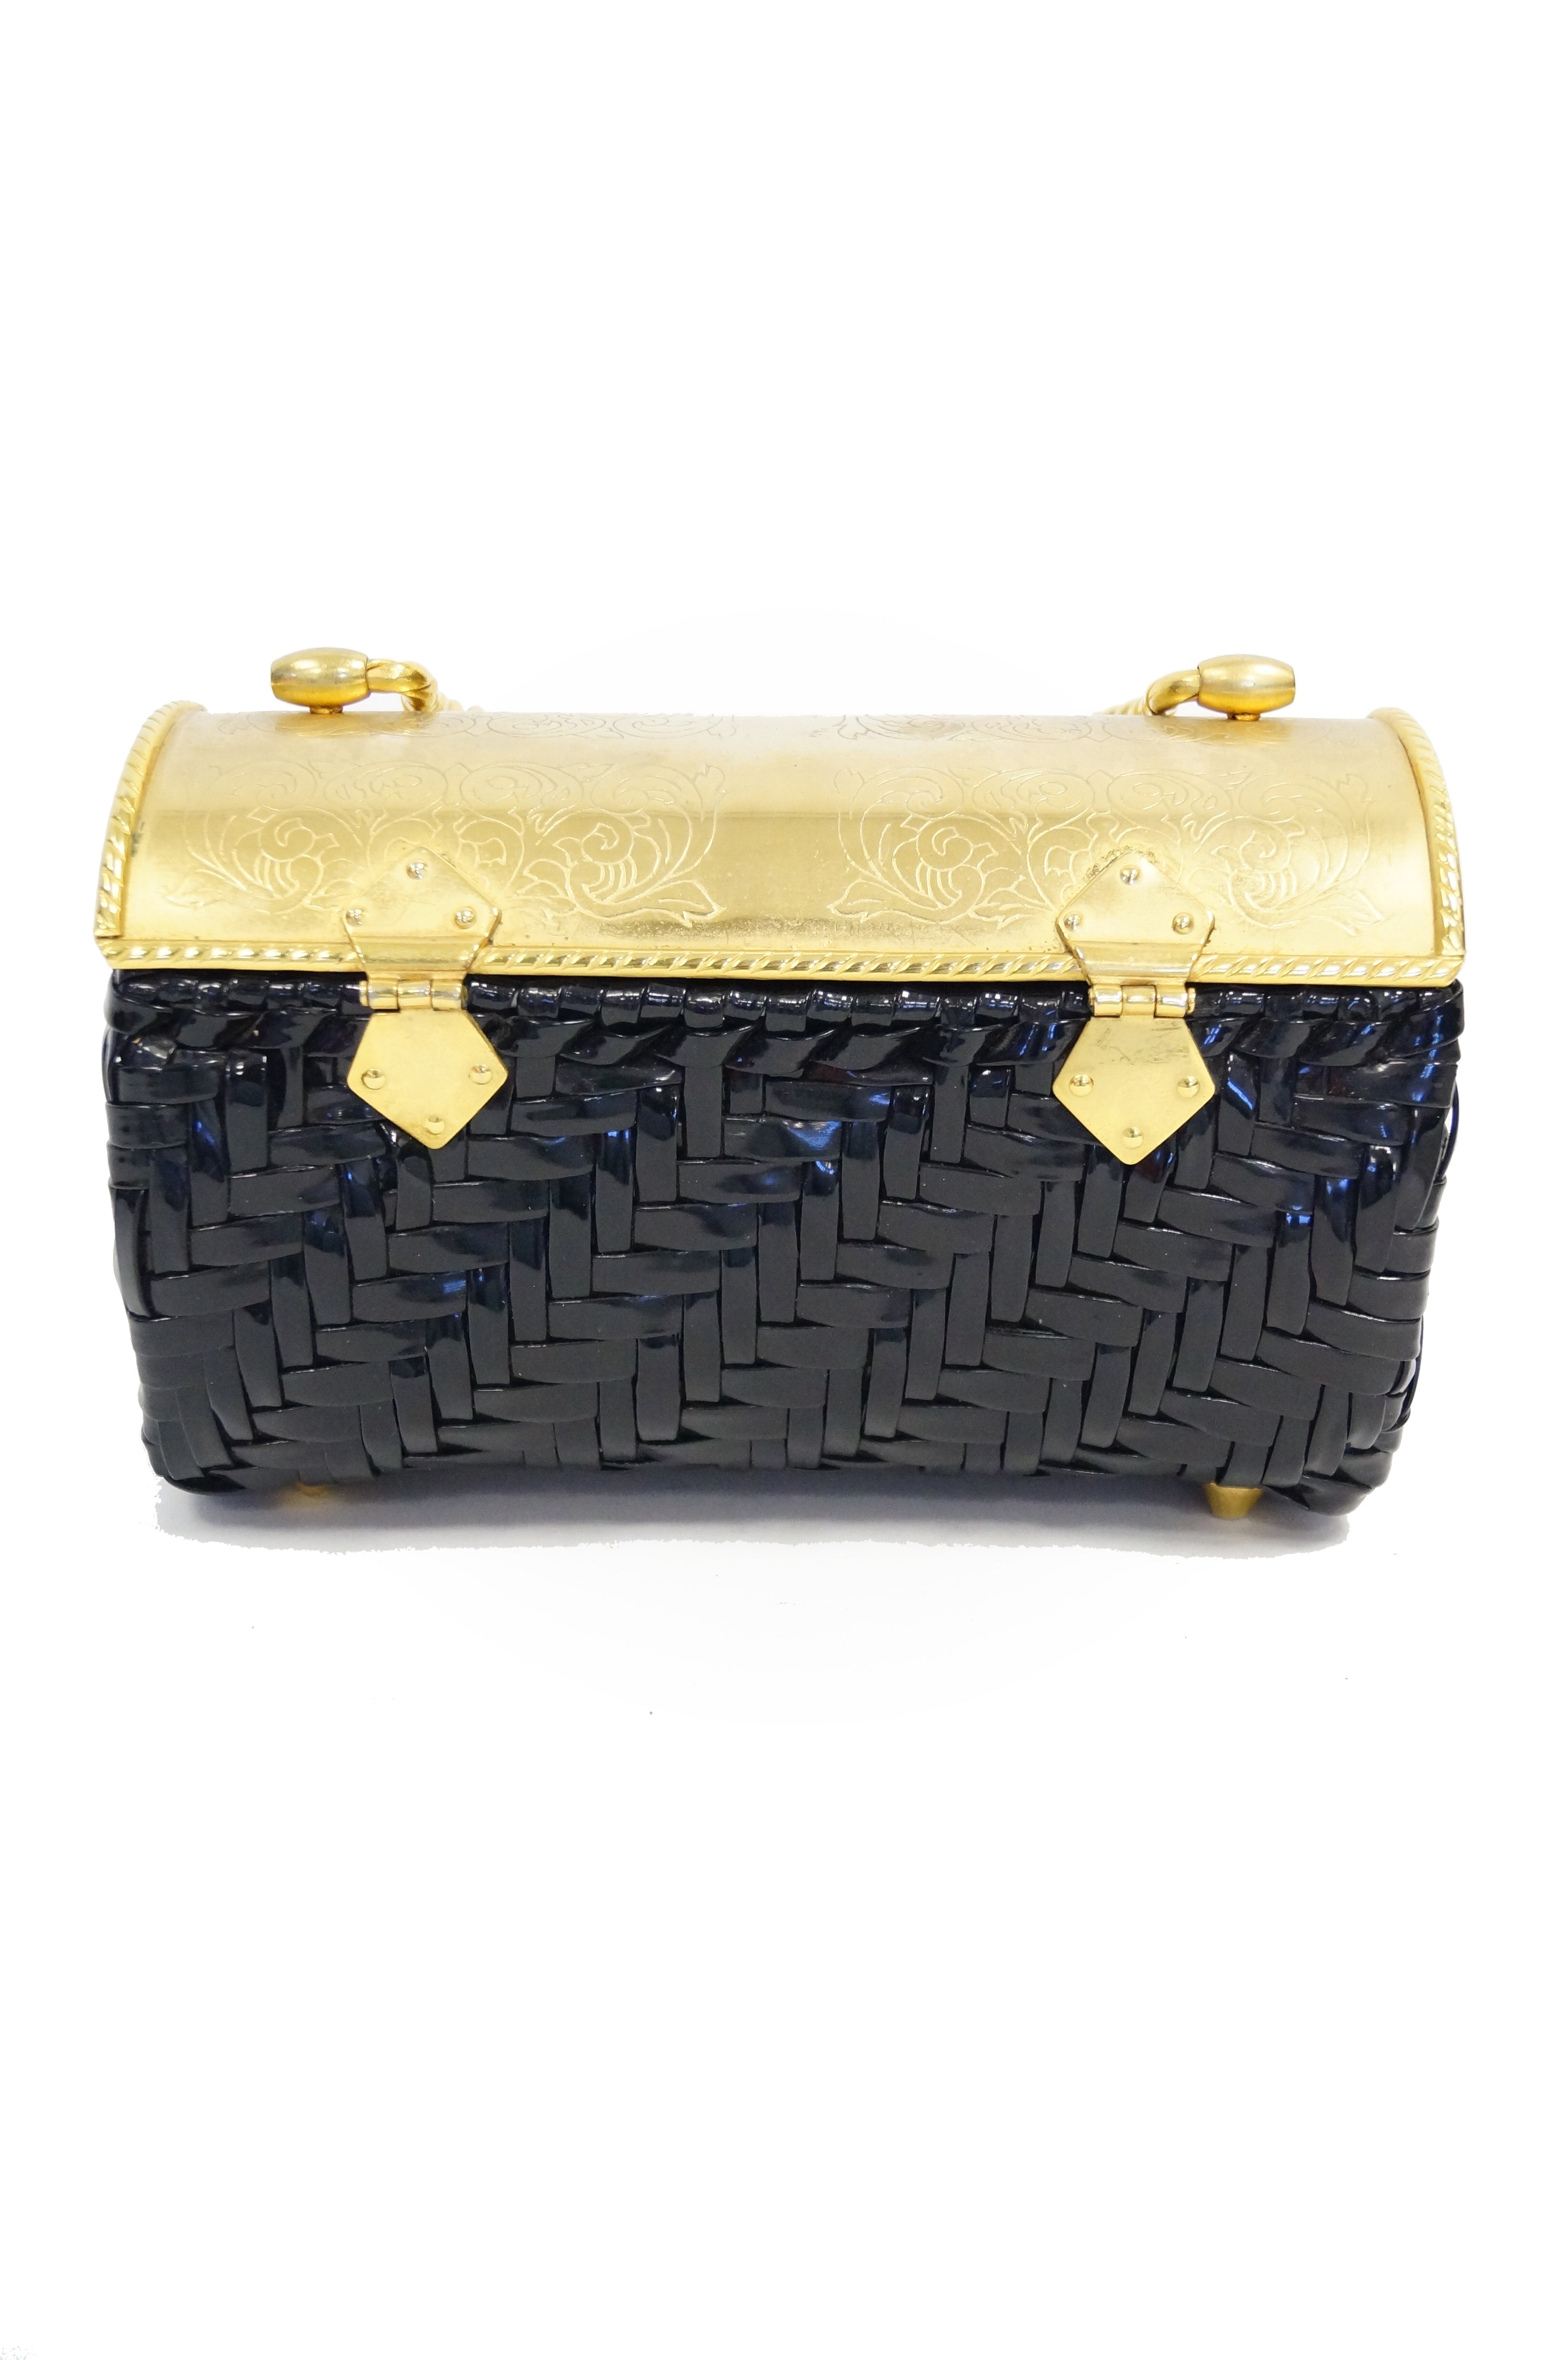 Lot - Neiman Marcus brown woven satin box purse with gold tone